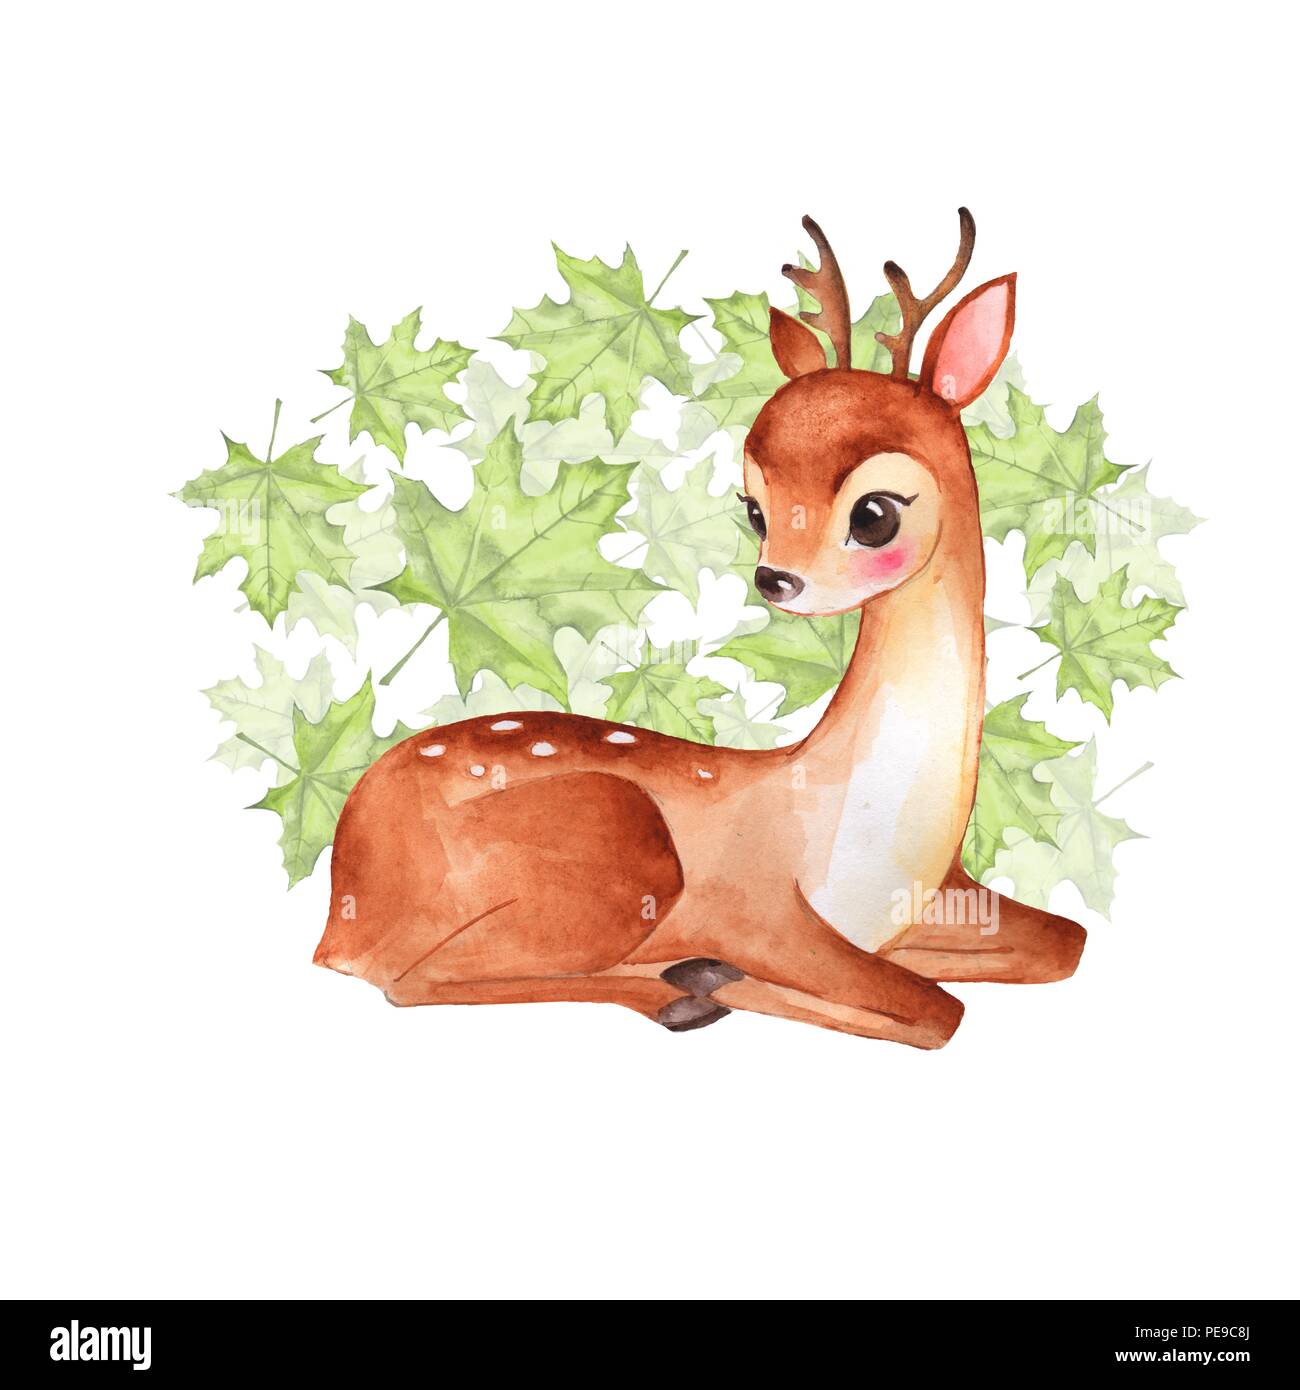 Baby Deer. Cute fawn. Watercolor illustration Stock Photo